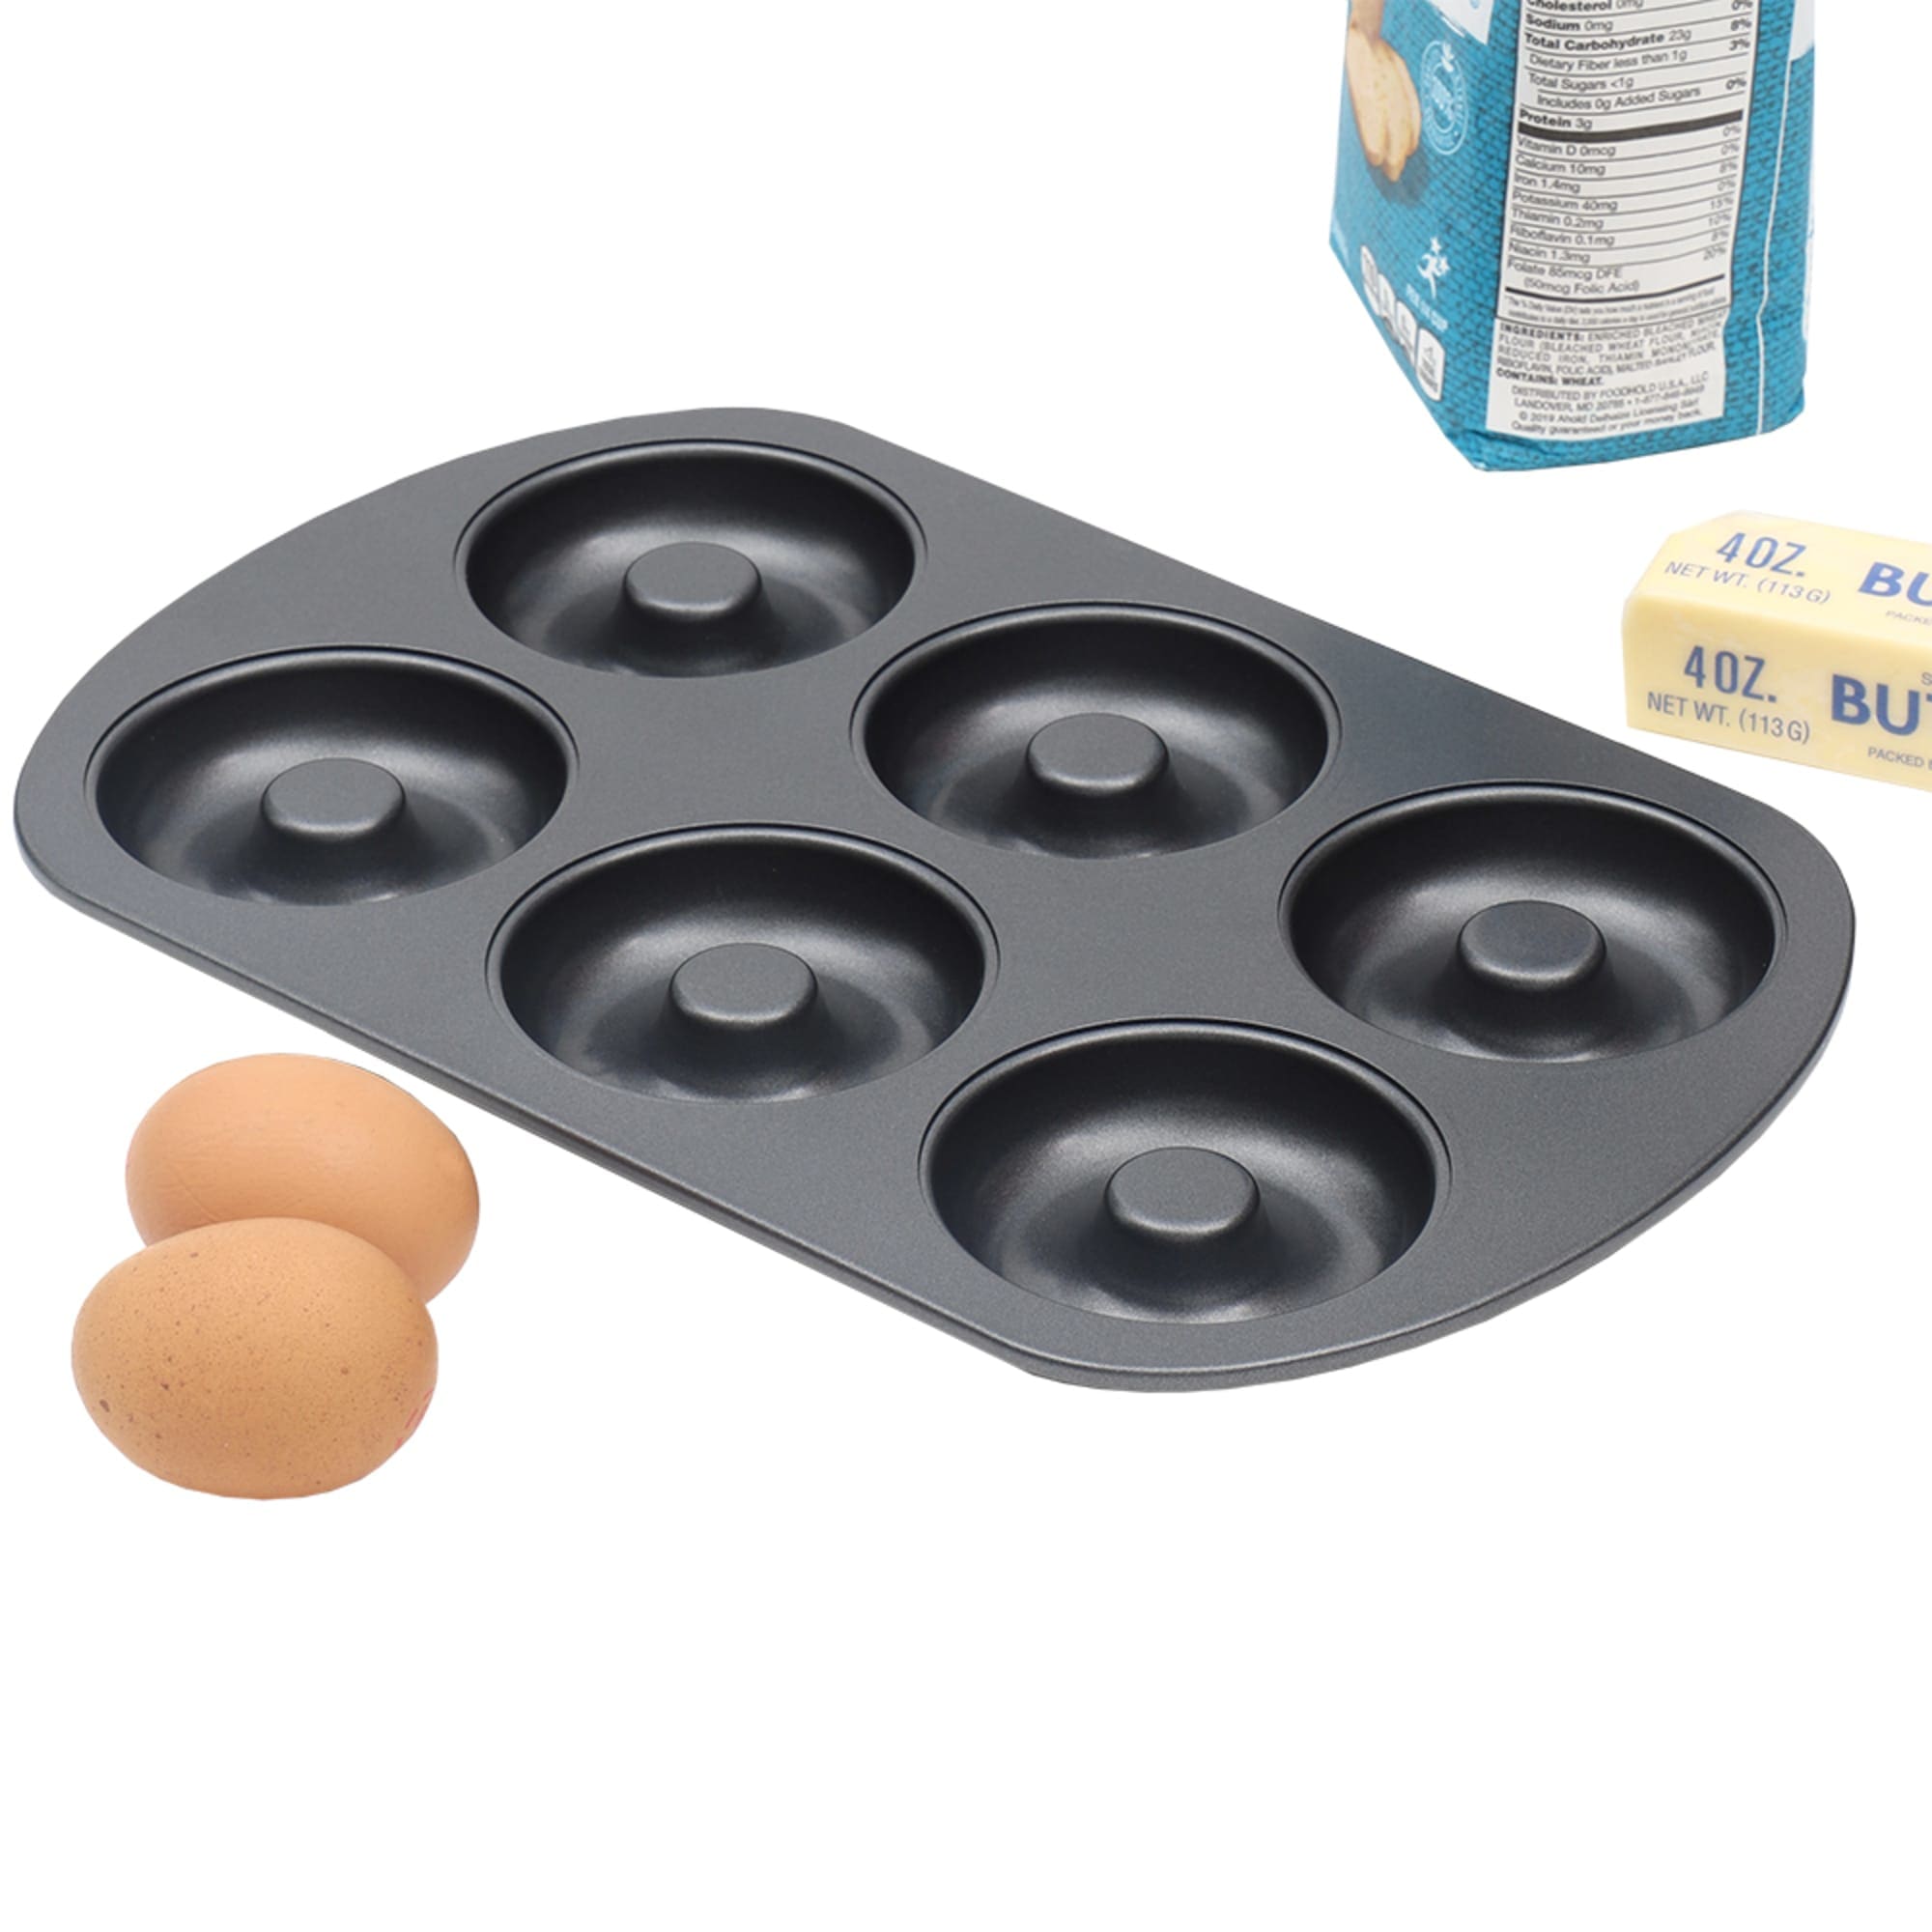 Home Basics 6-Cup Non-Stick Donut Pan, Black $6.50 EACH, CASE PACK OF 12